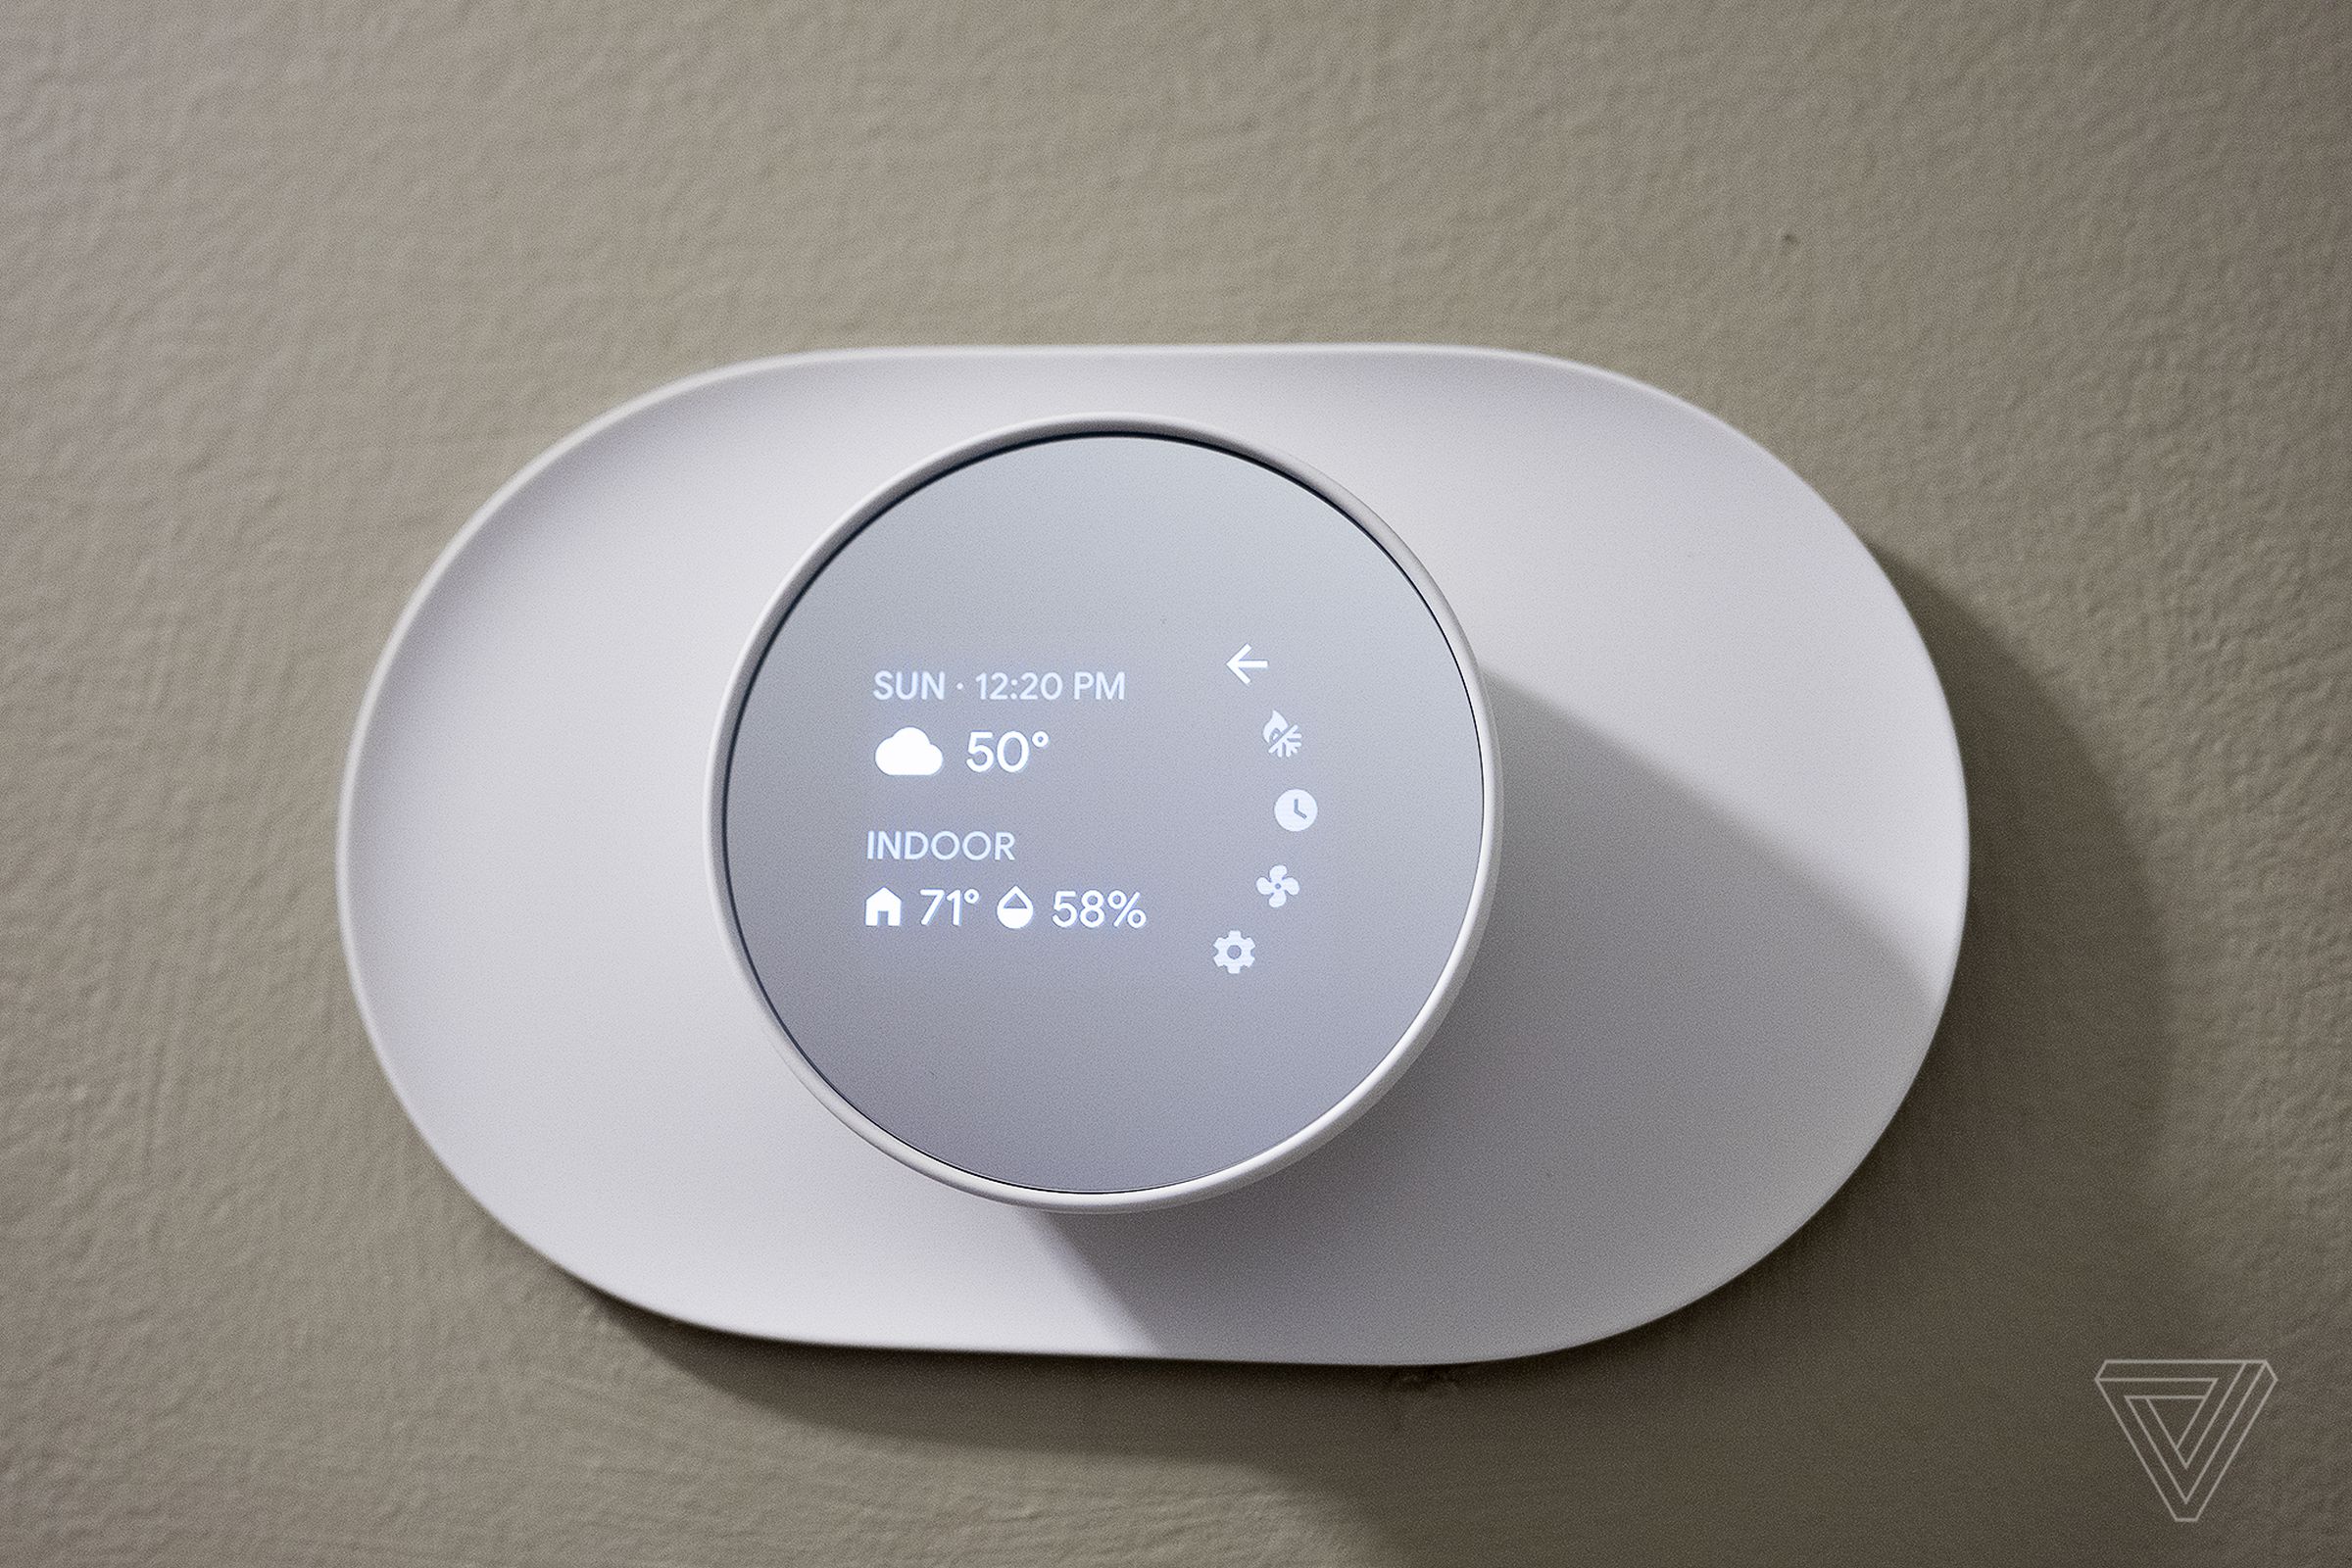 You can control a handful of functions on the thermostat itself, but most settings are found in the Google Home smartphone app.